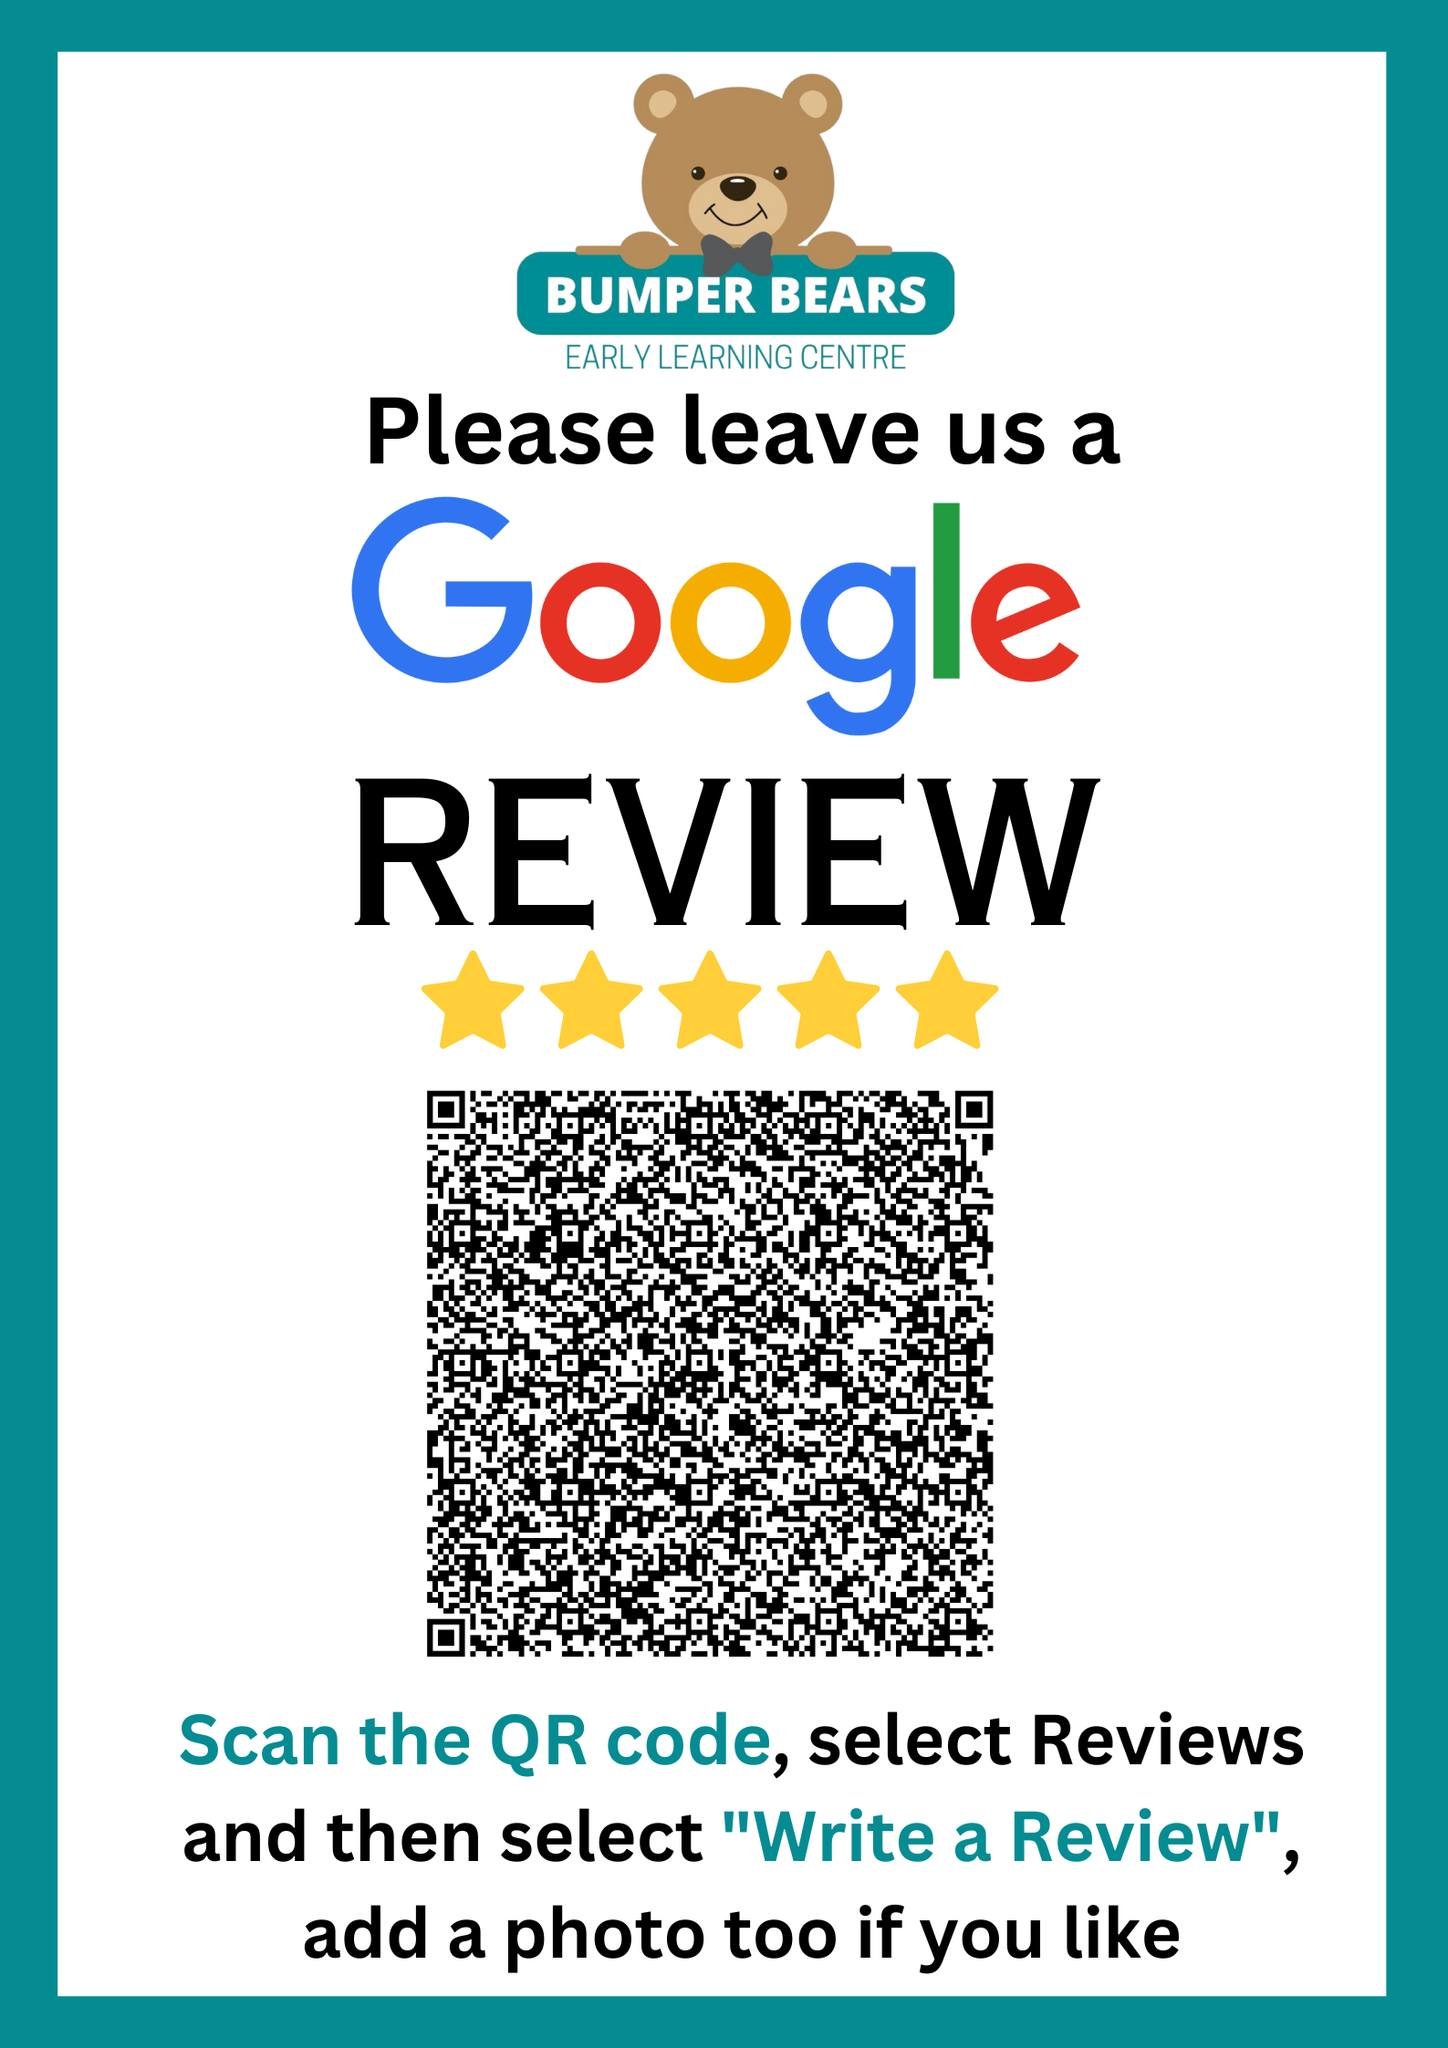 Ever wanted to leave us a 5 star review before?? Well, here is your chance, scan the QR code or go to this link: https://tinyurl.com/5js5tzbs, click &quot;Reviews&quot; and leave us some feedback about how we are doing.